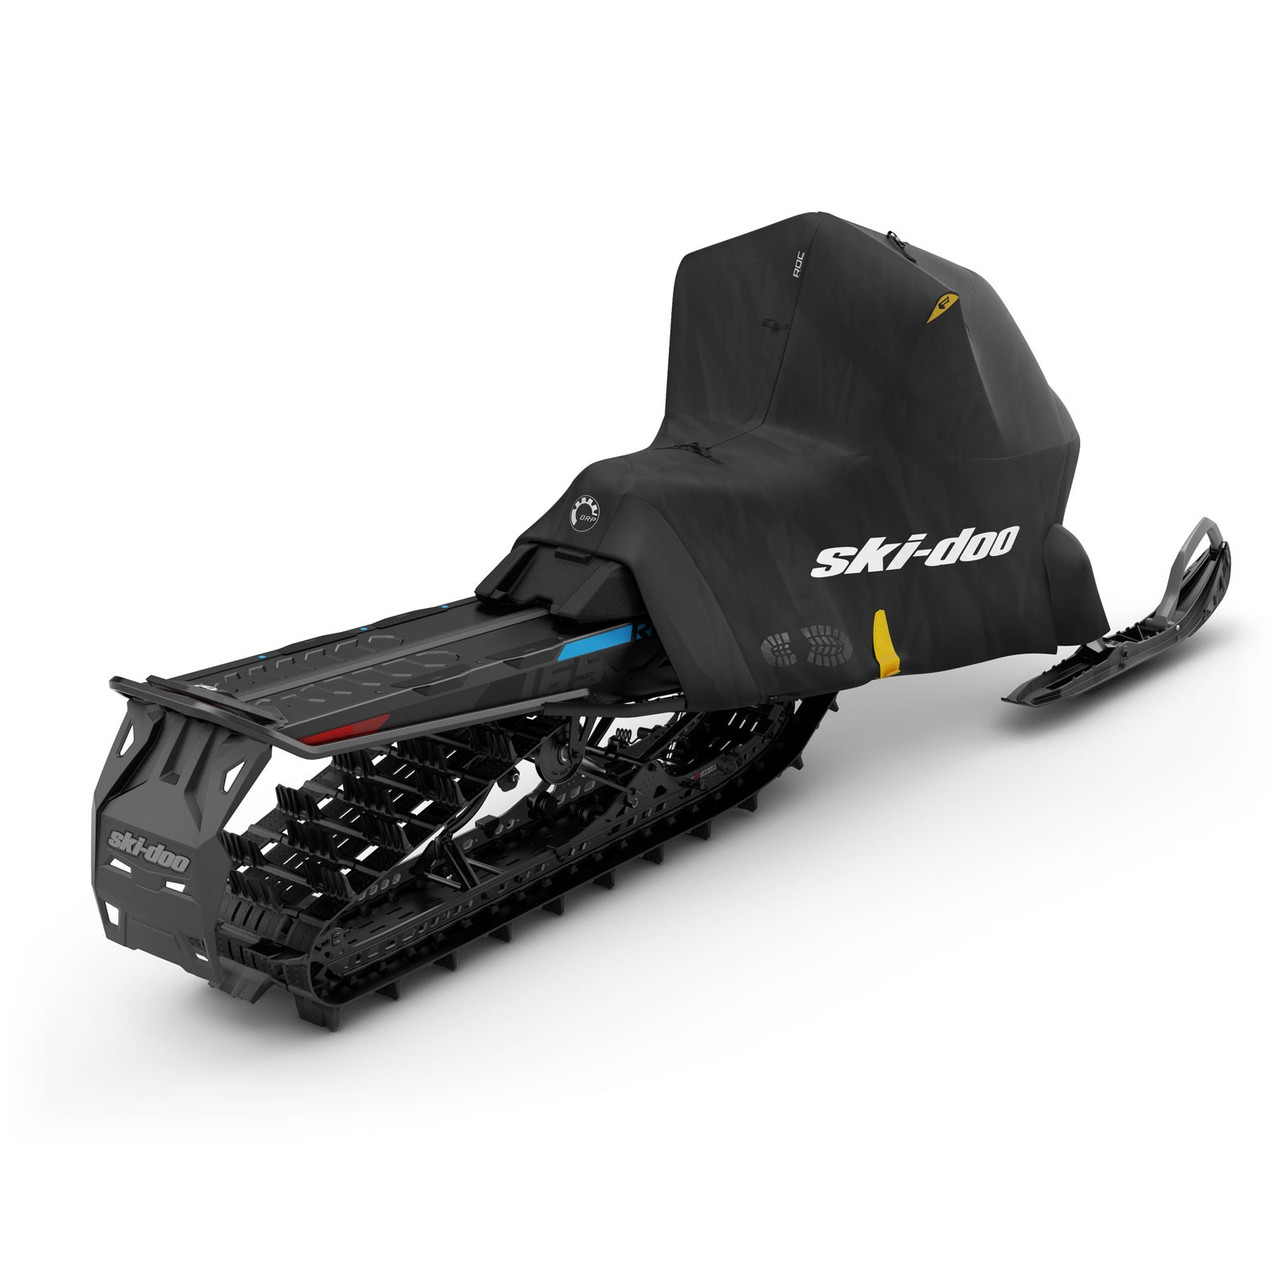 Ski-Doo New OEM Ride-On-Cover System, 860201973